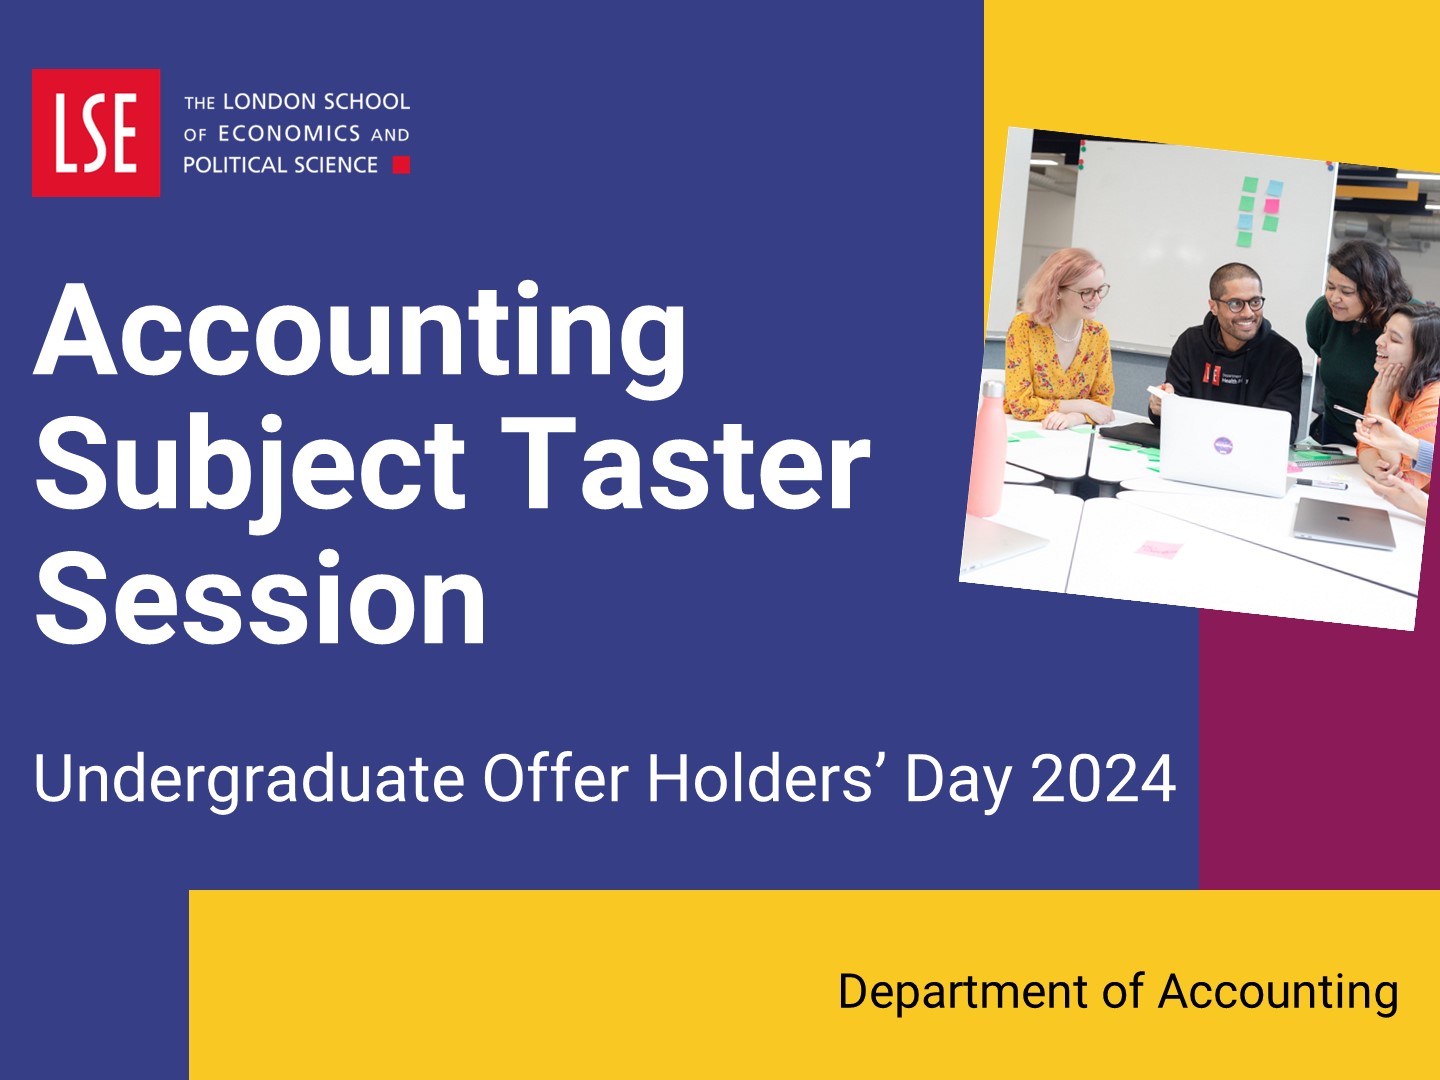 Watch the accounting subject taster session